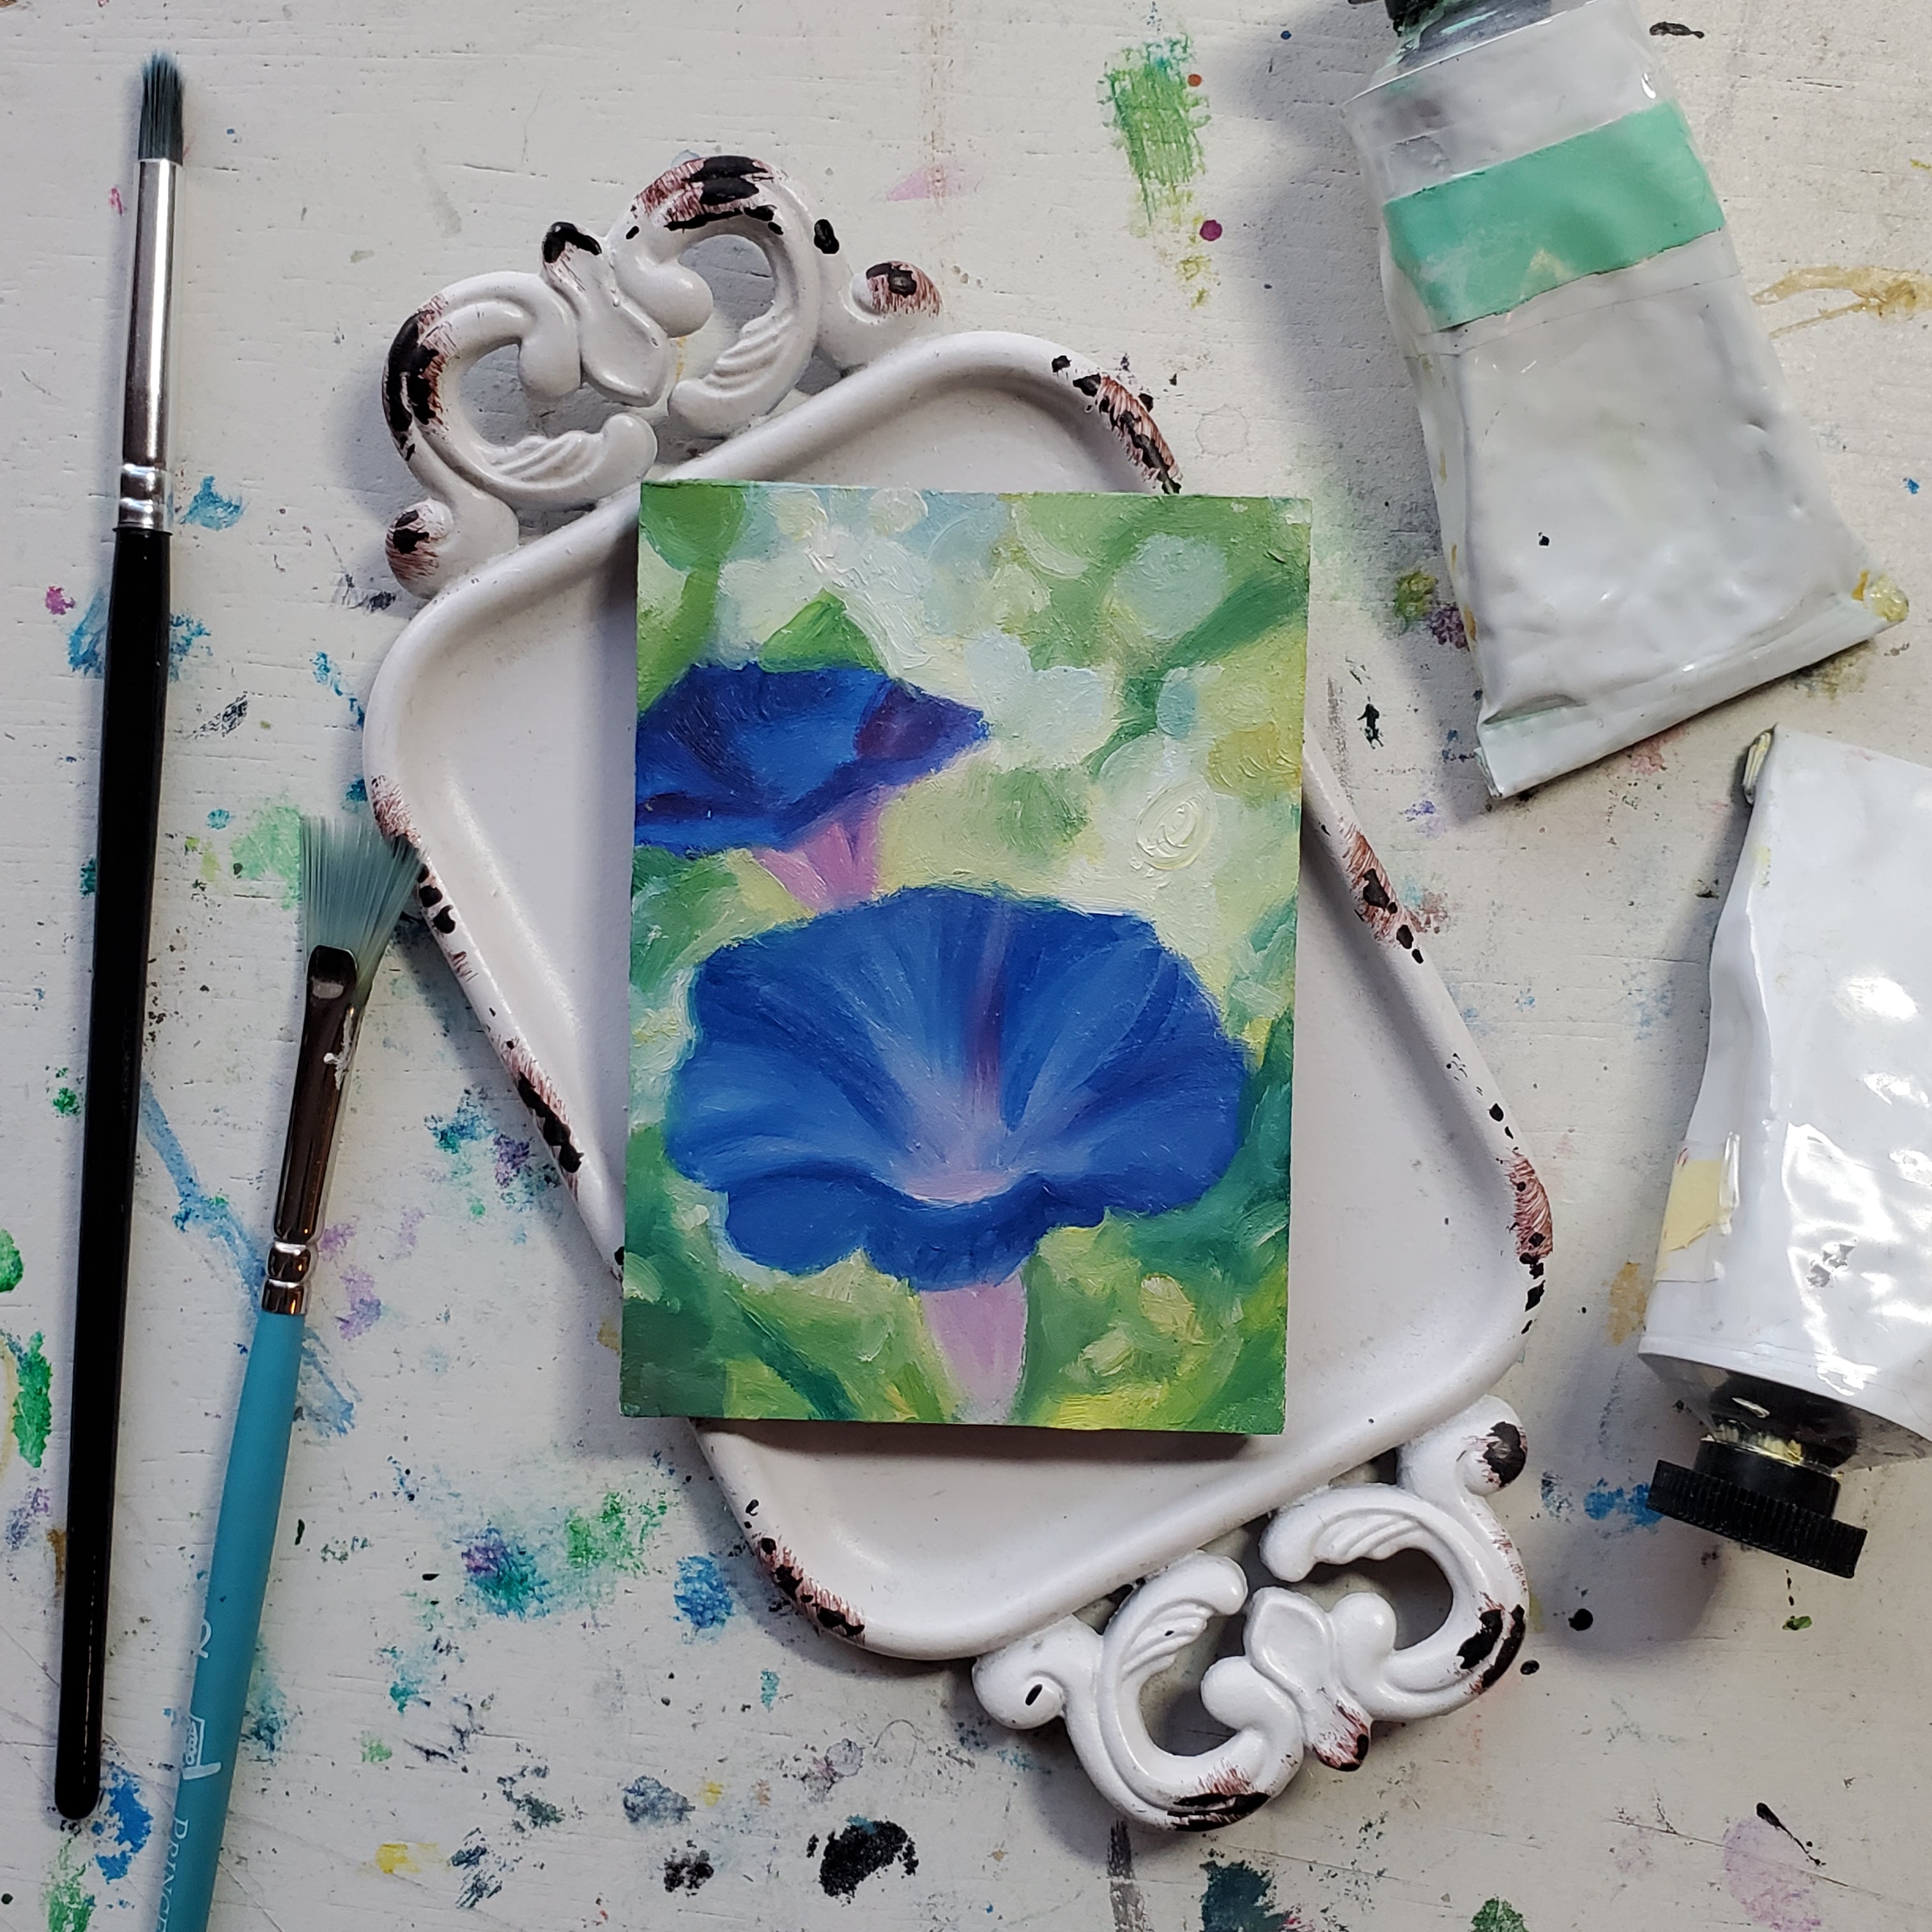 Morning Glory || Mini Oil Painting on Panel || Display Easel Included